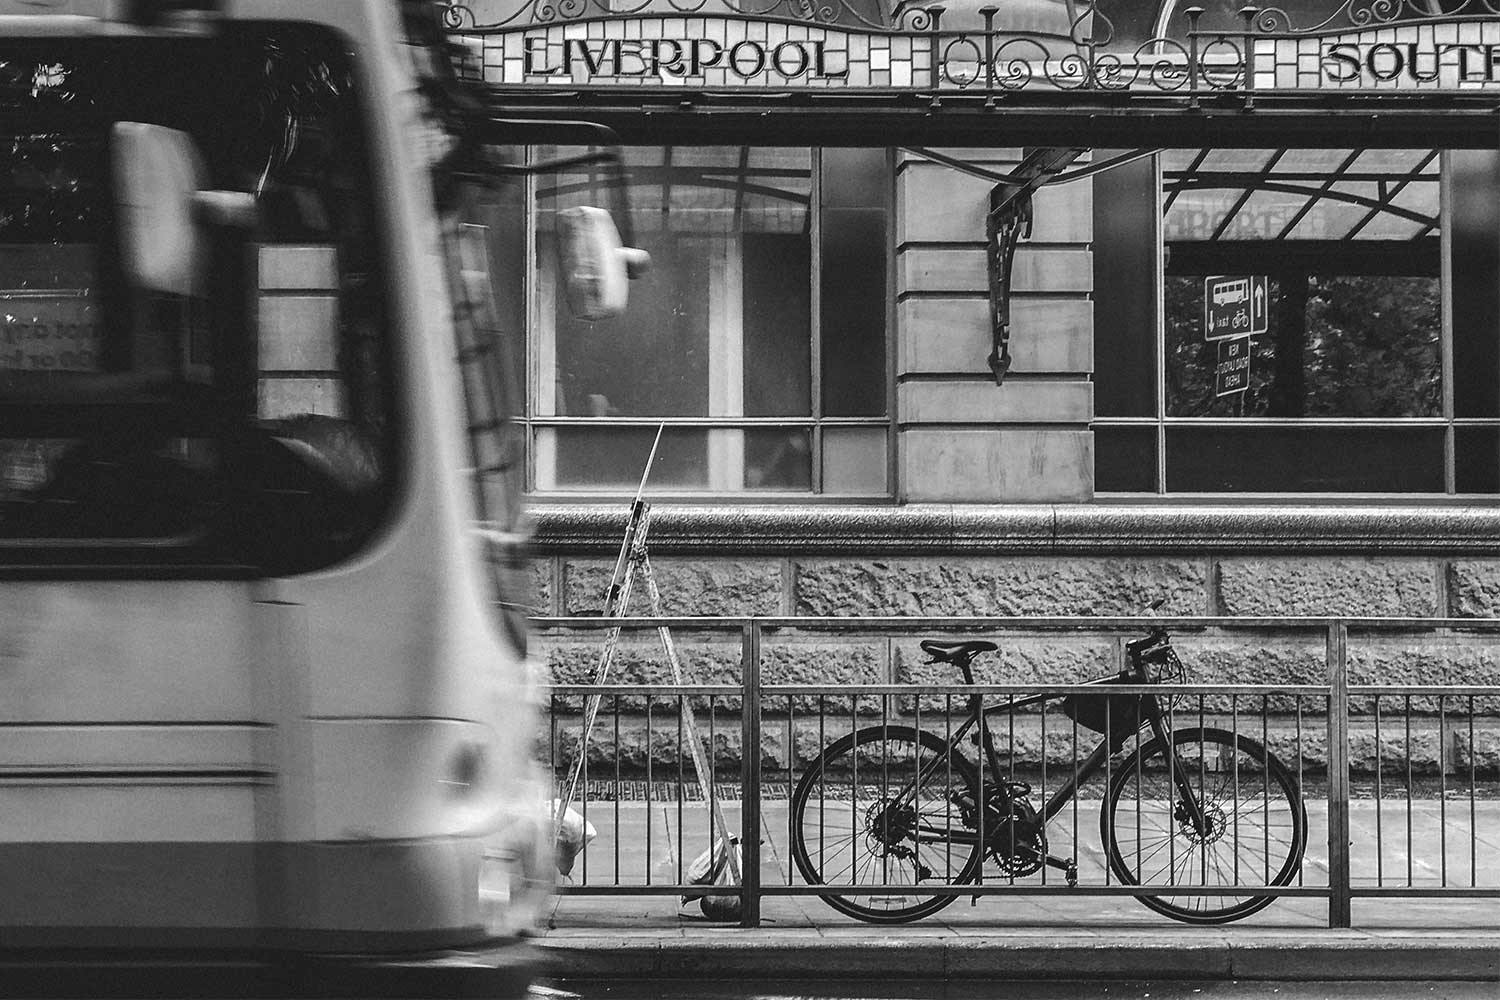 A bike leans against a metal fence as a bus drives past. Behind is a stone building with an awning that reads "Liverpool."